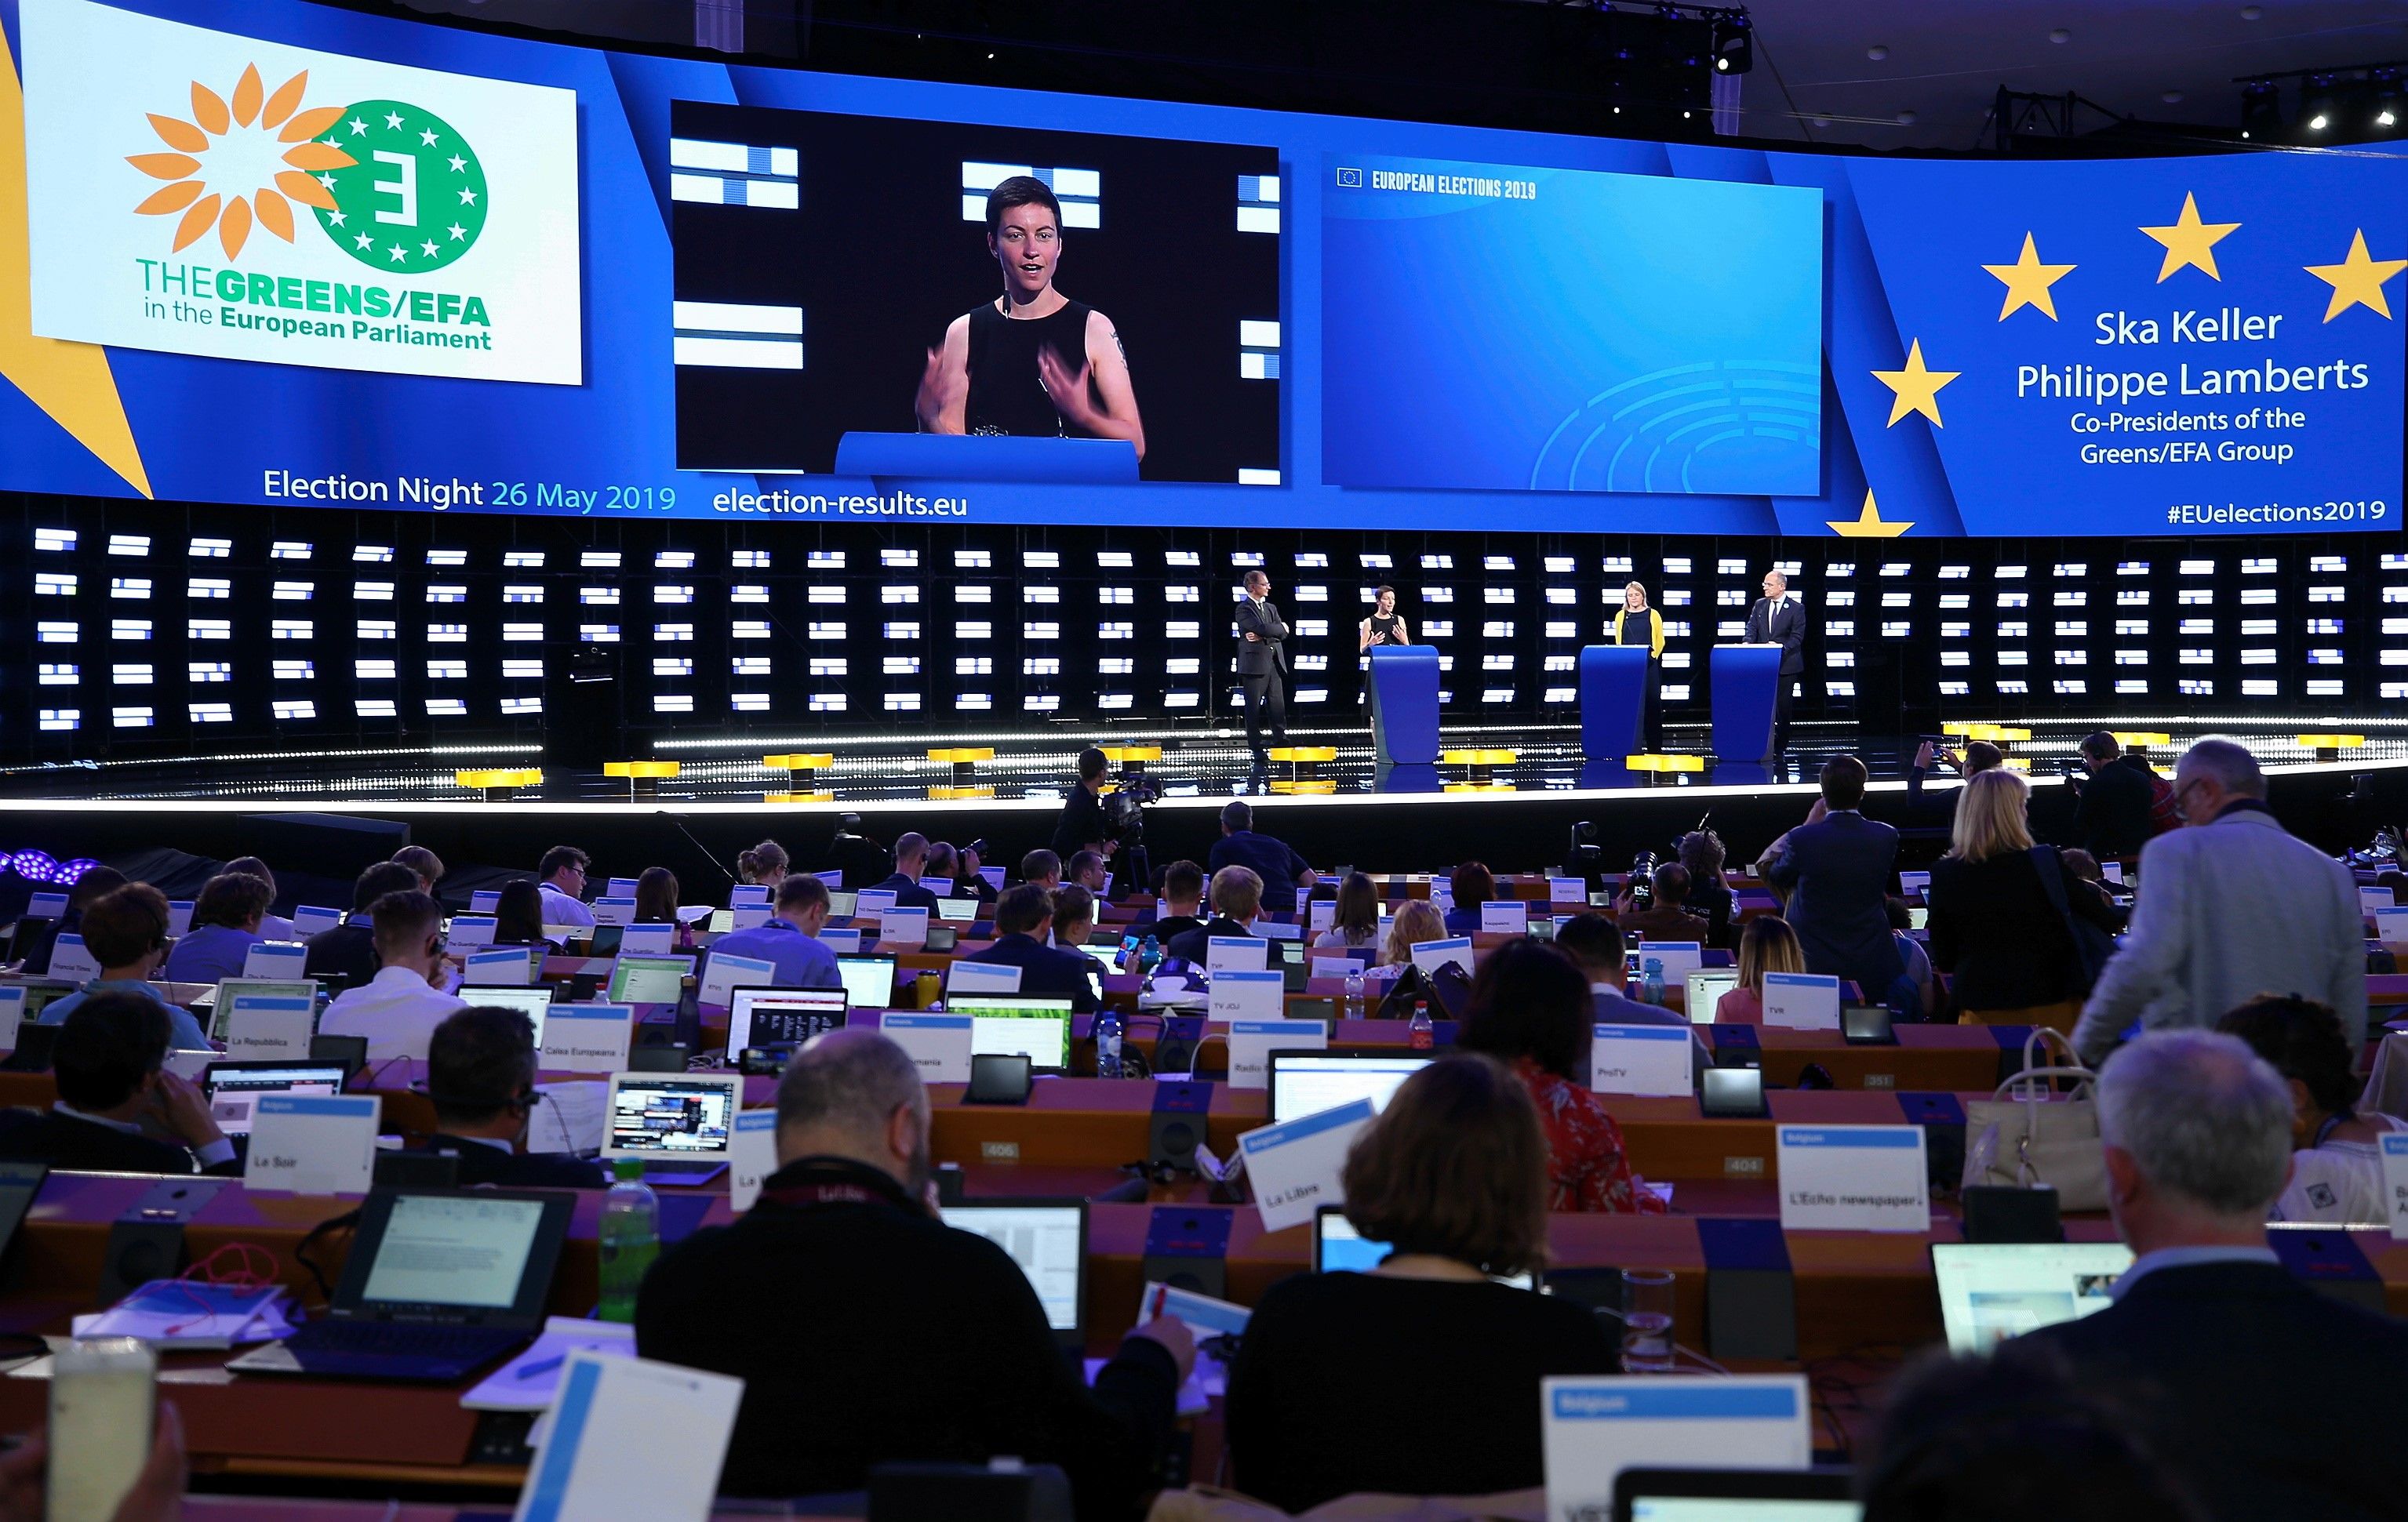 Ska Keller Co-President of the Greens/EFA Group at EP General Assembly Hall, on May 26, 2019 in Brussels, Belgium. 